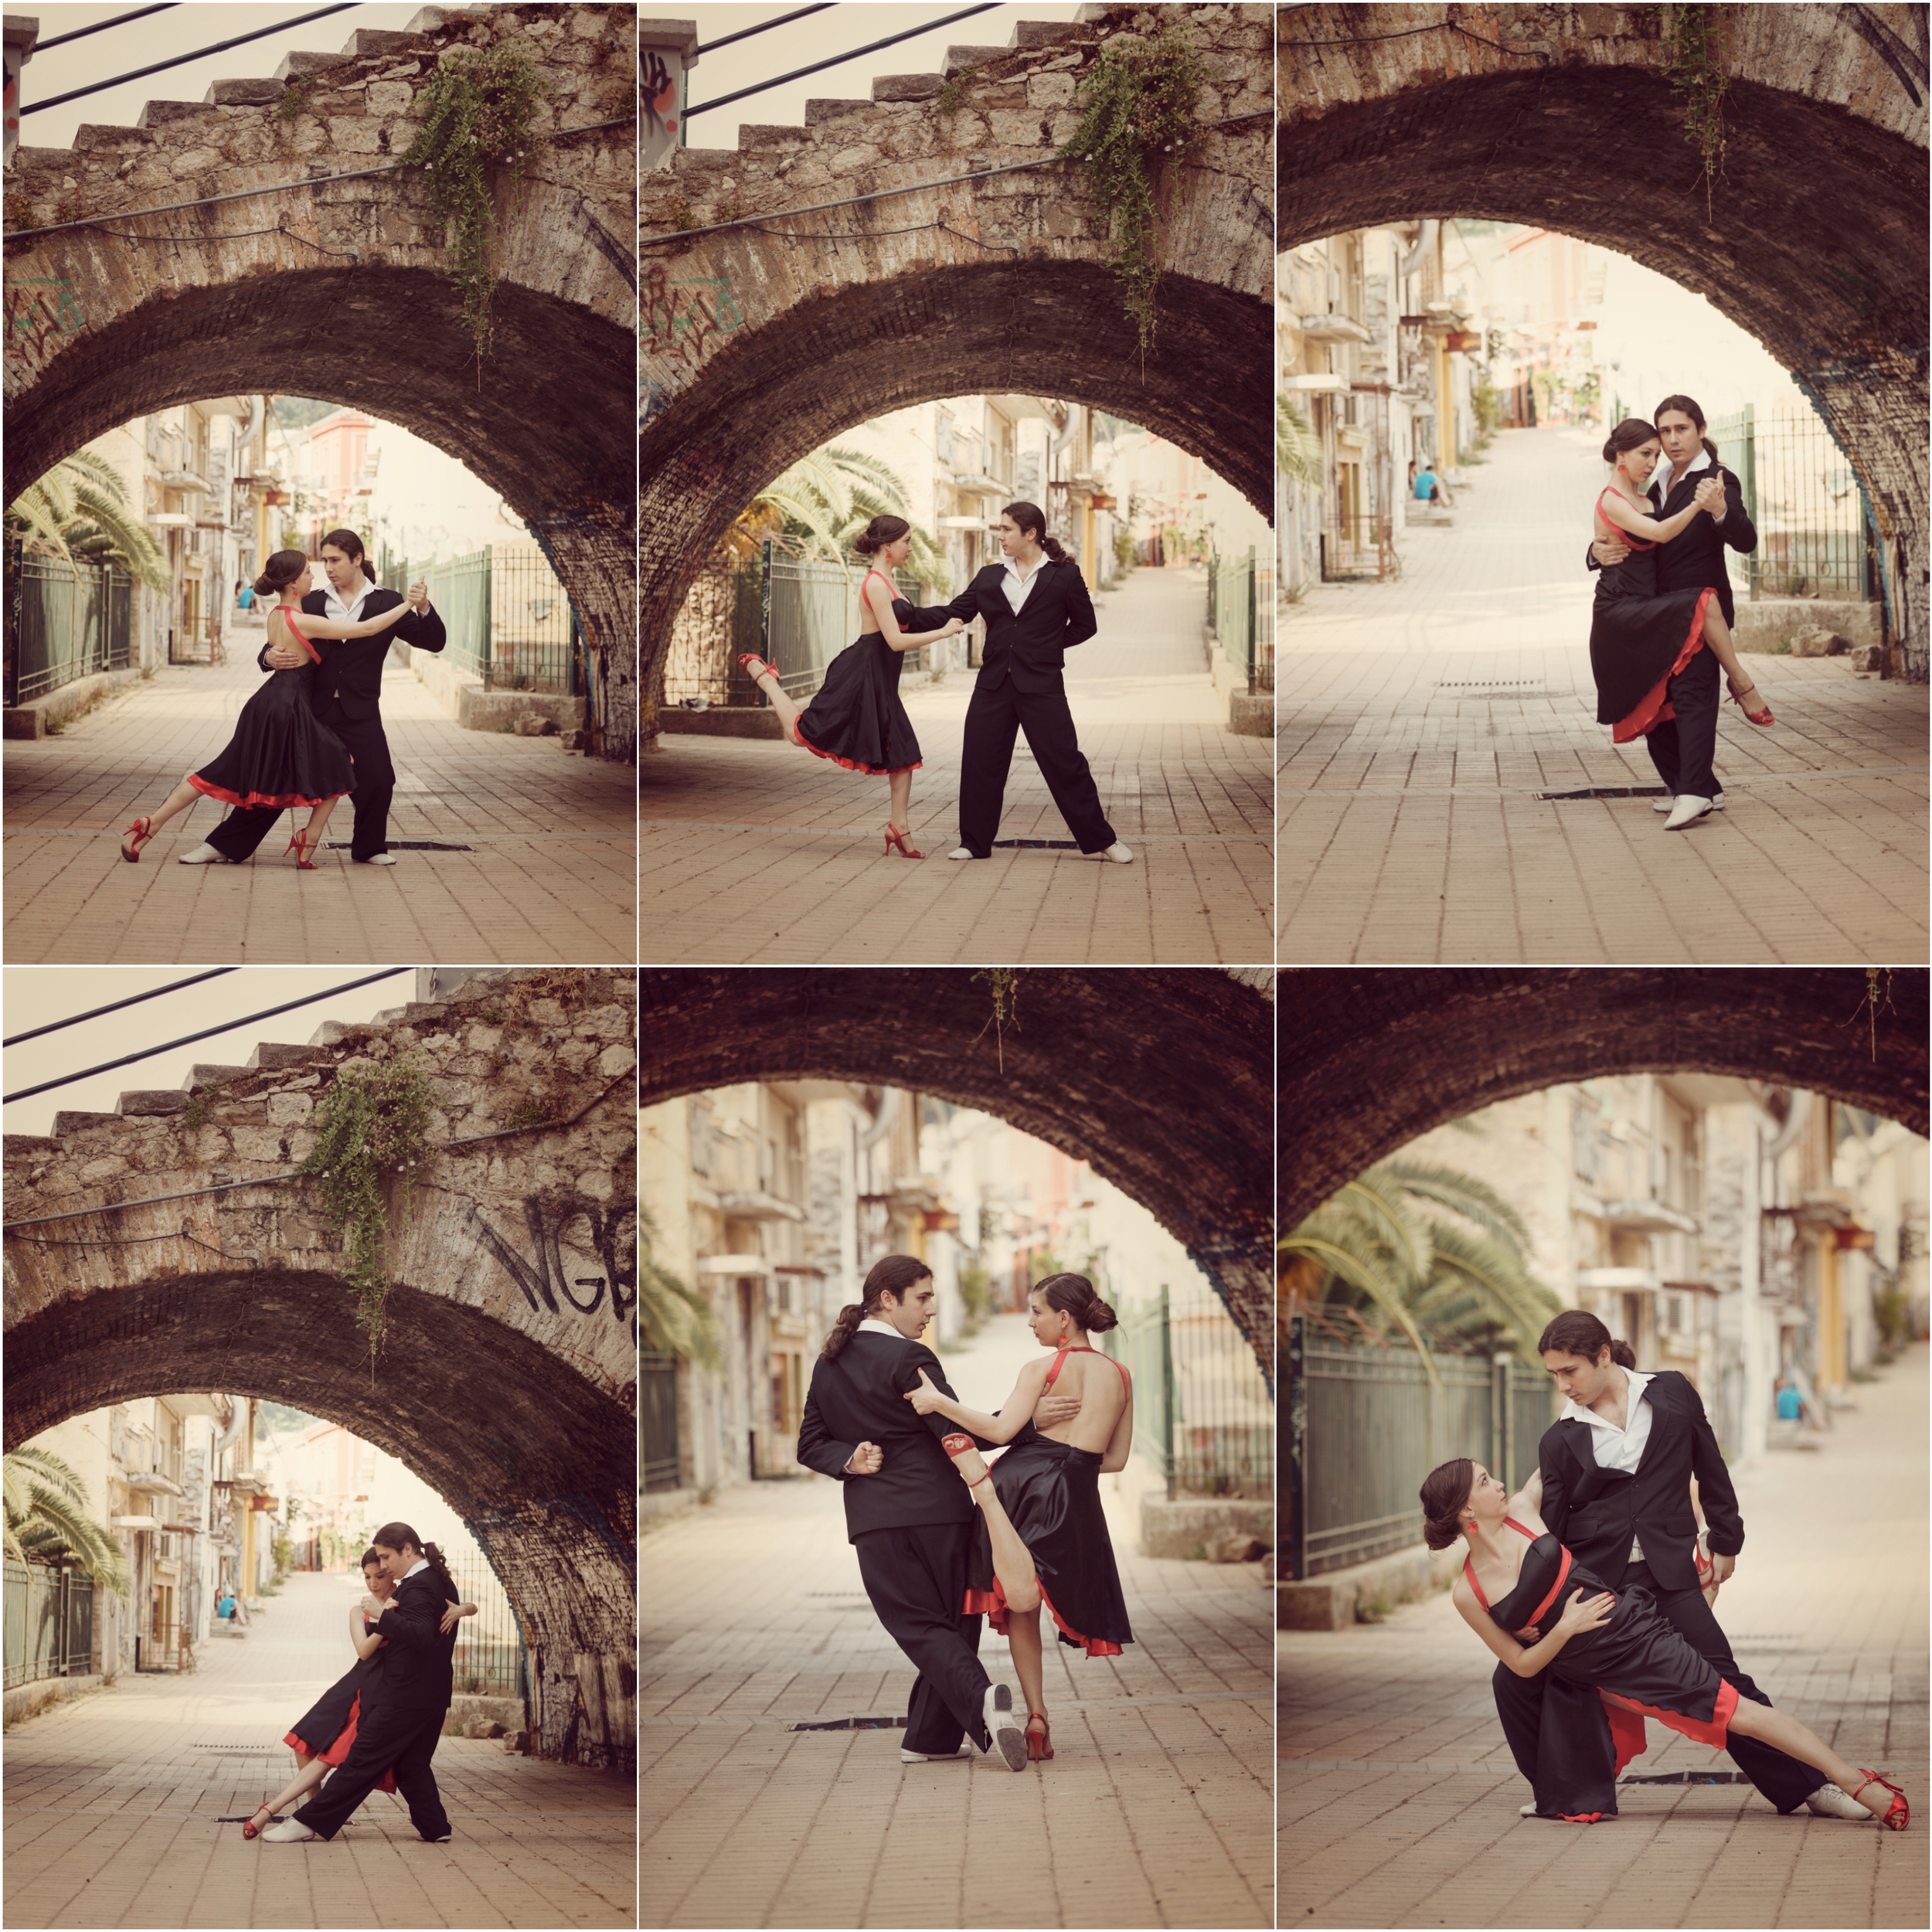 ANDRIOPOULOS_PHOTOGRAPHY TANGO 4.jpg